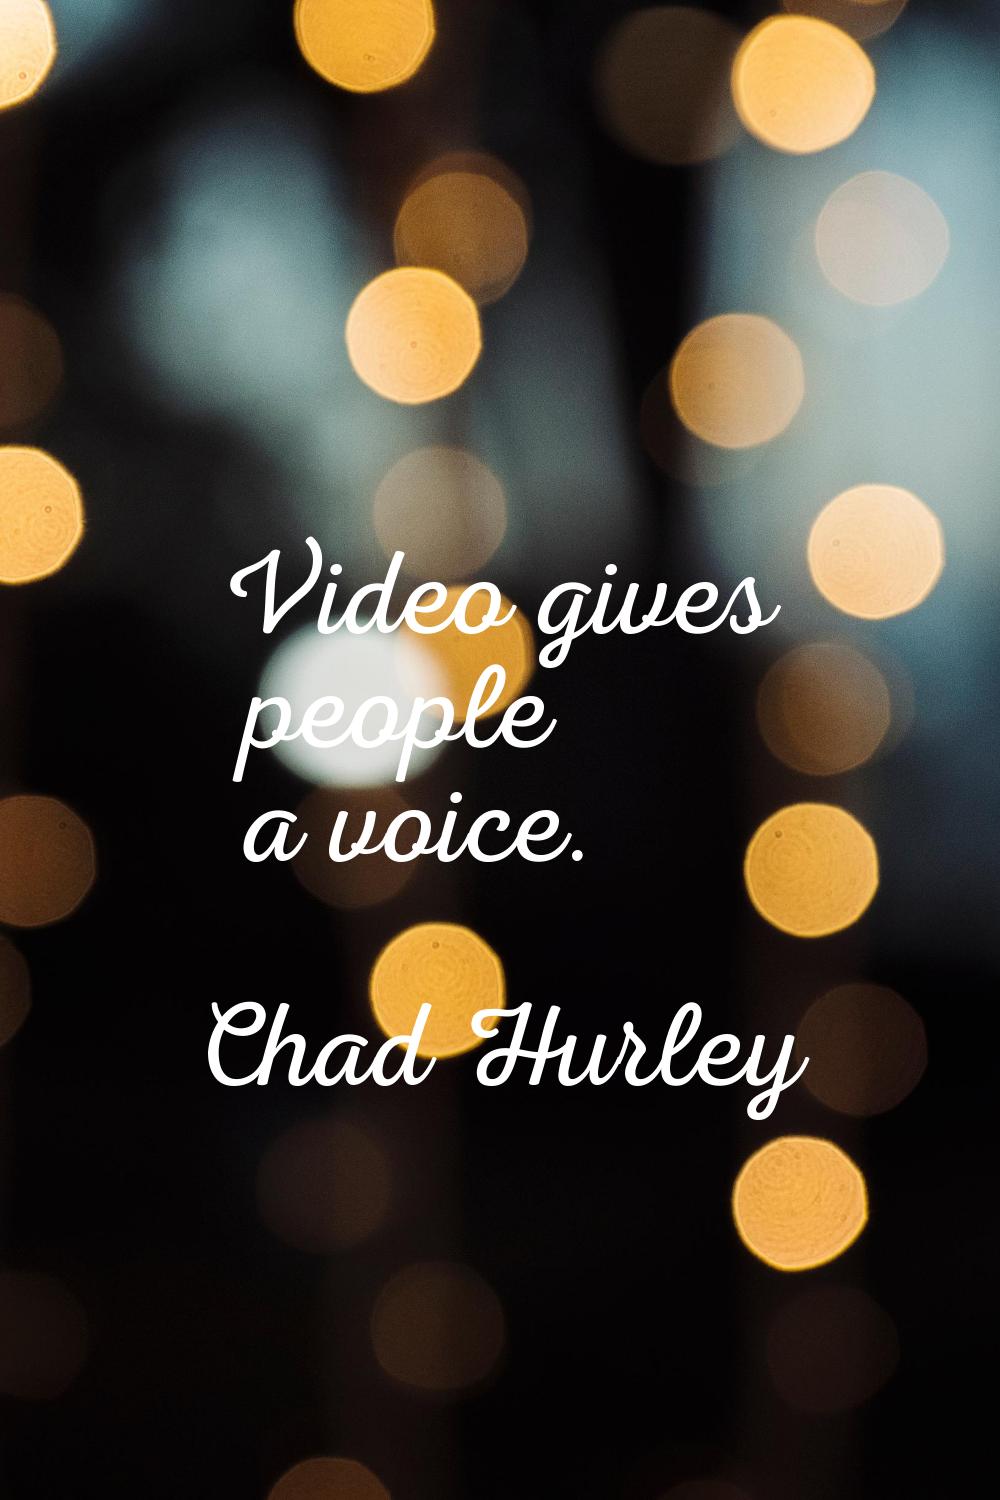 Video gives people a voice.